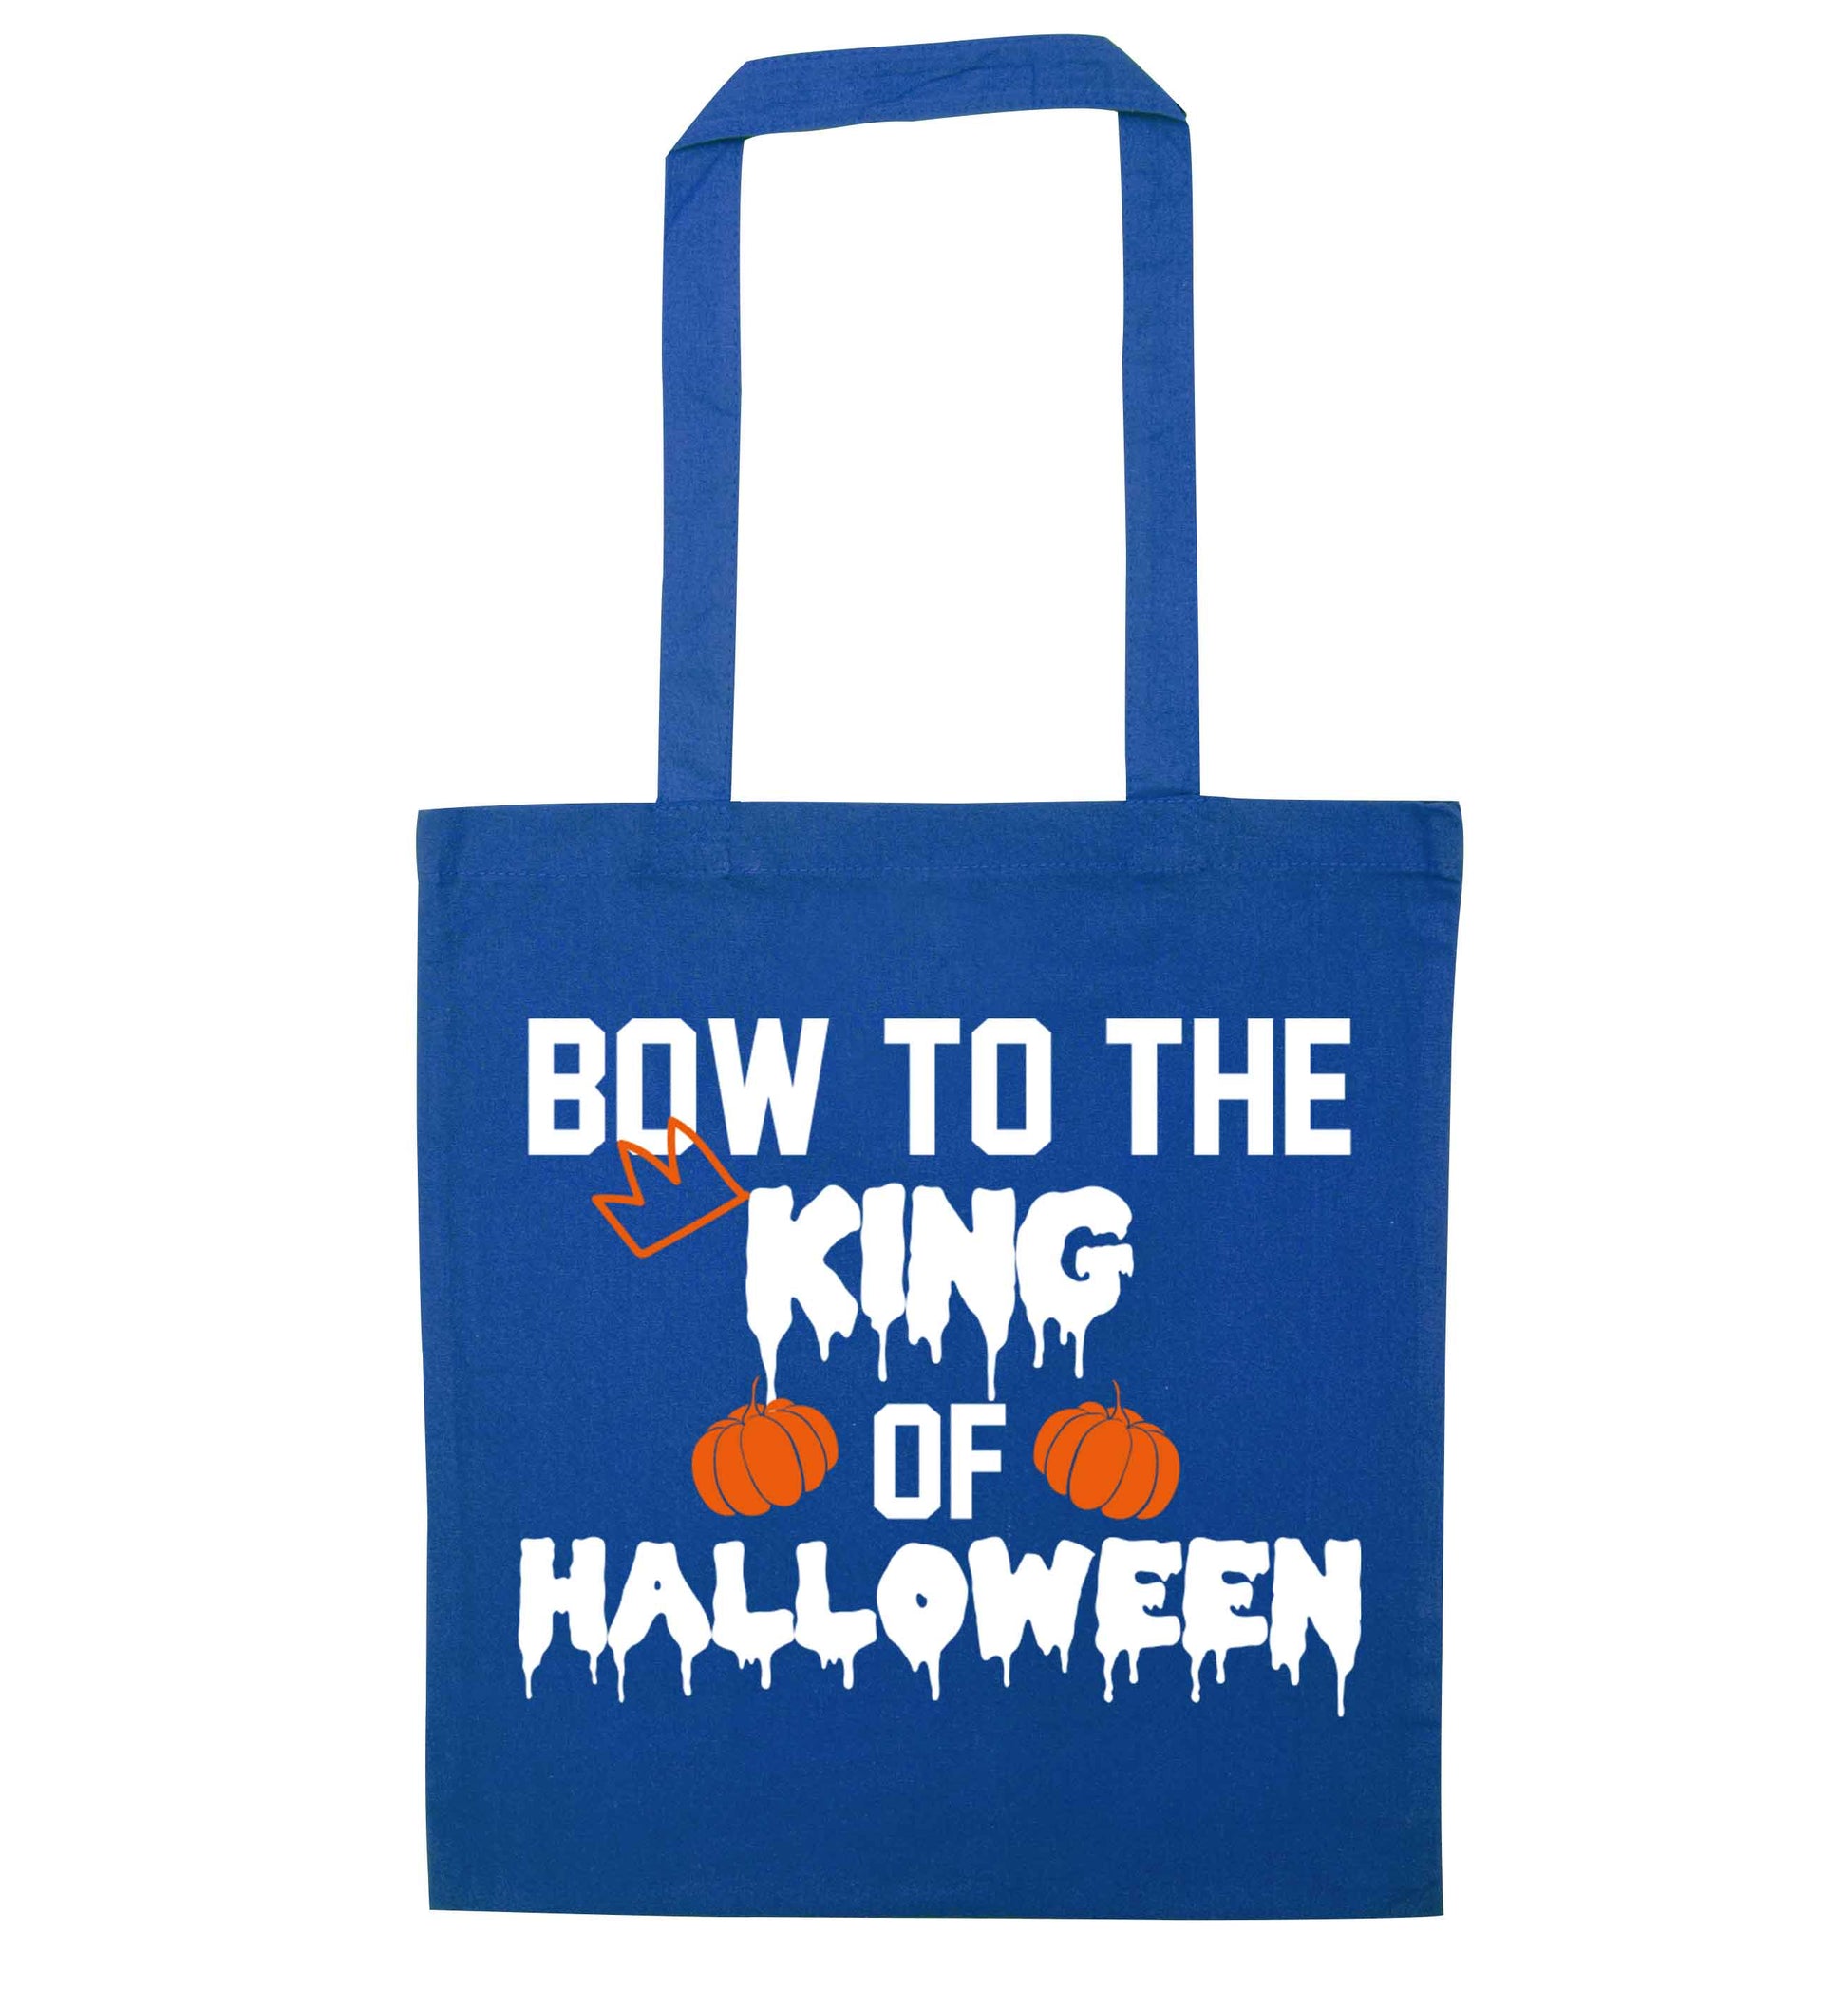 Bow to the King of halloween blue tote bag